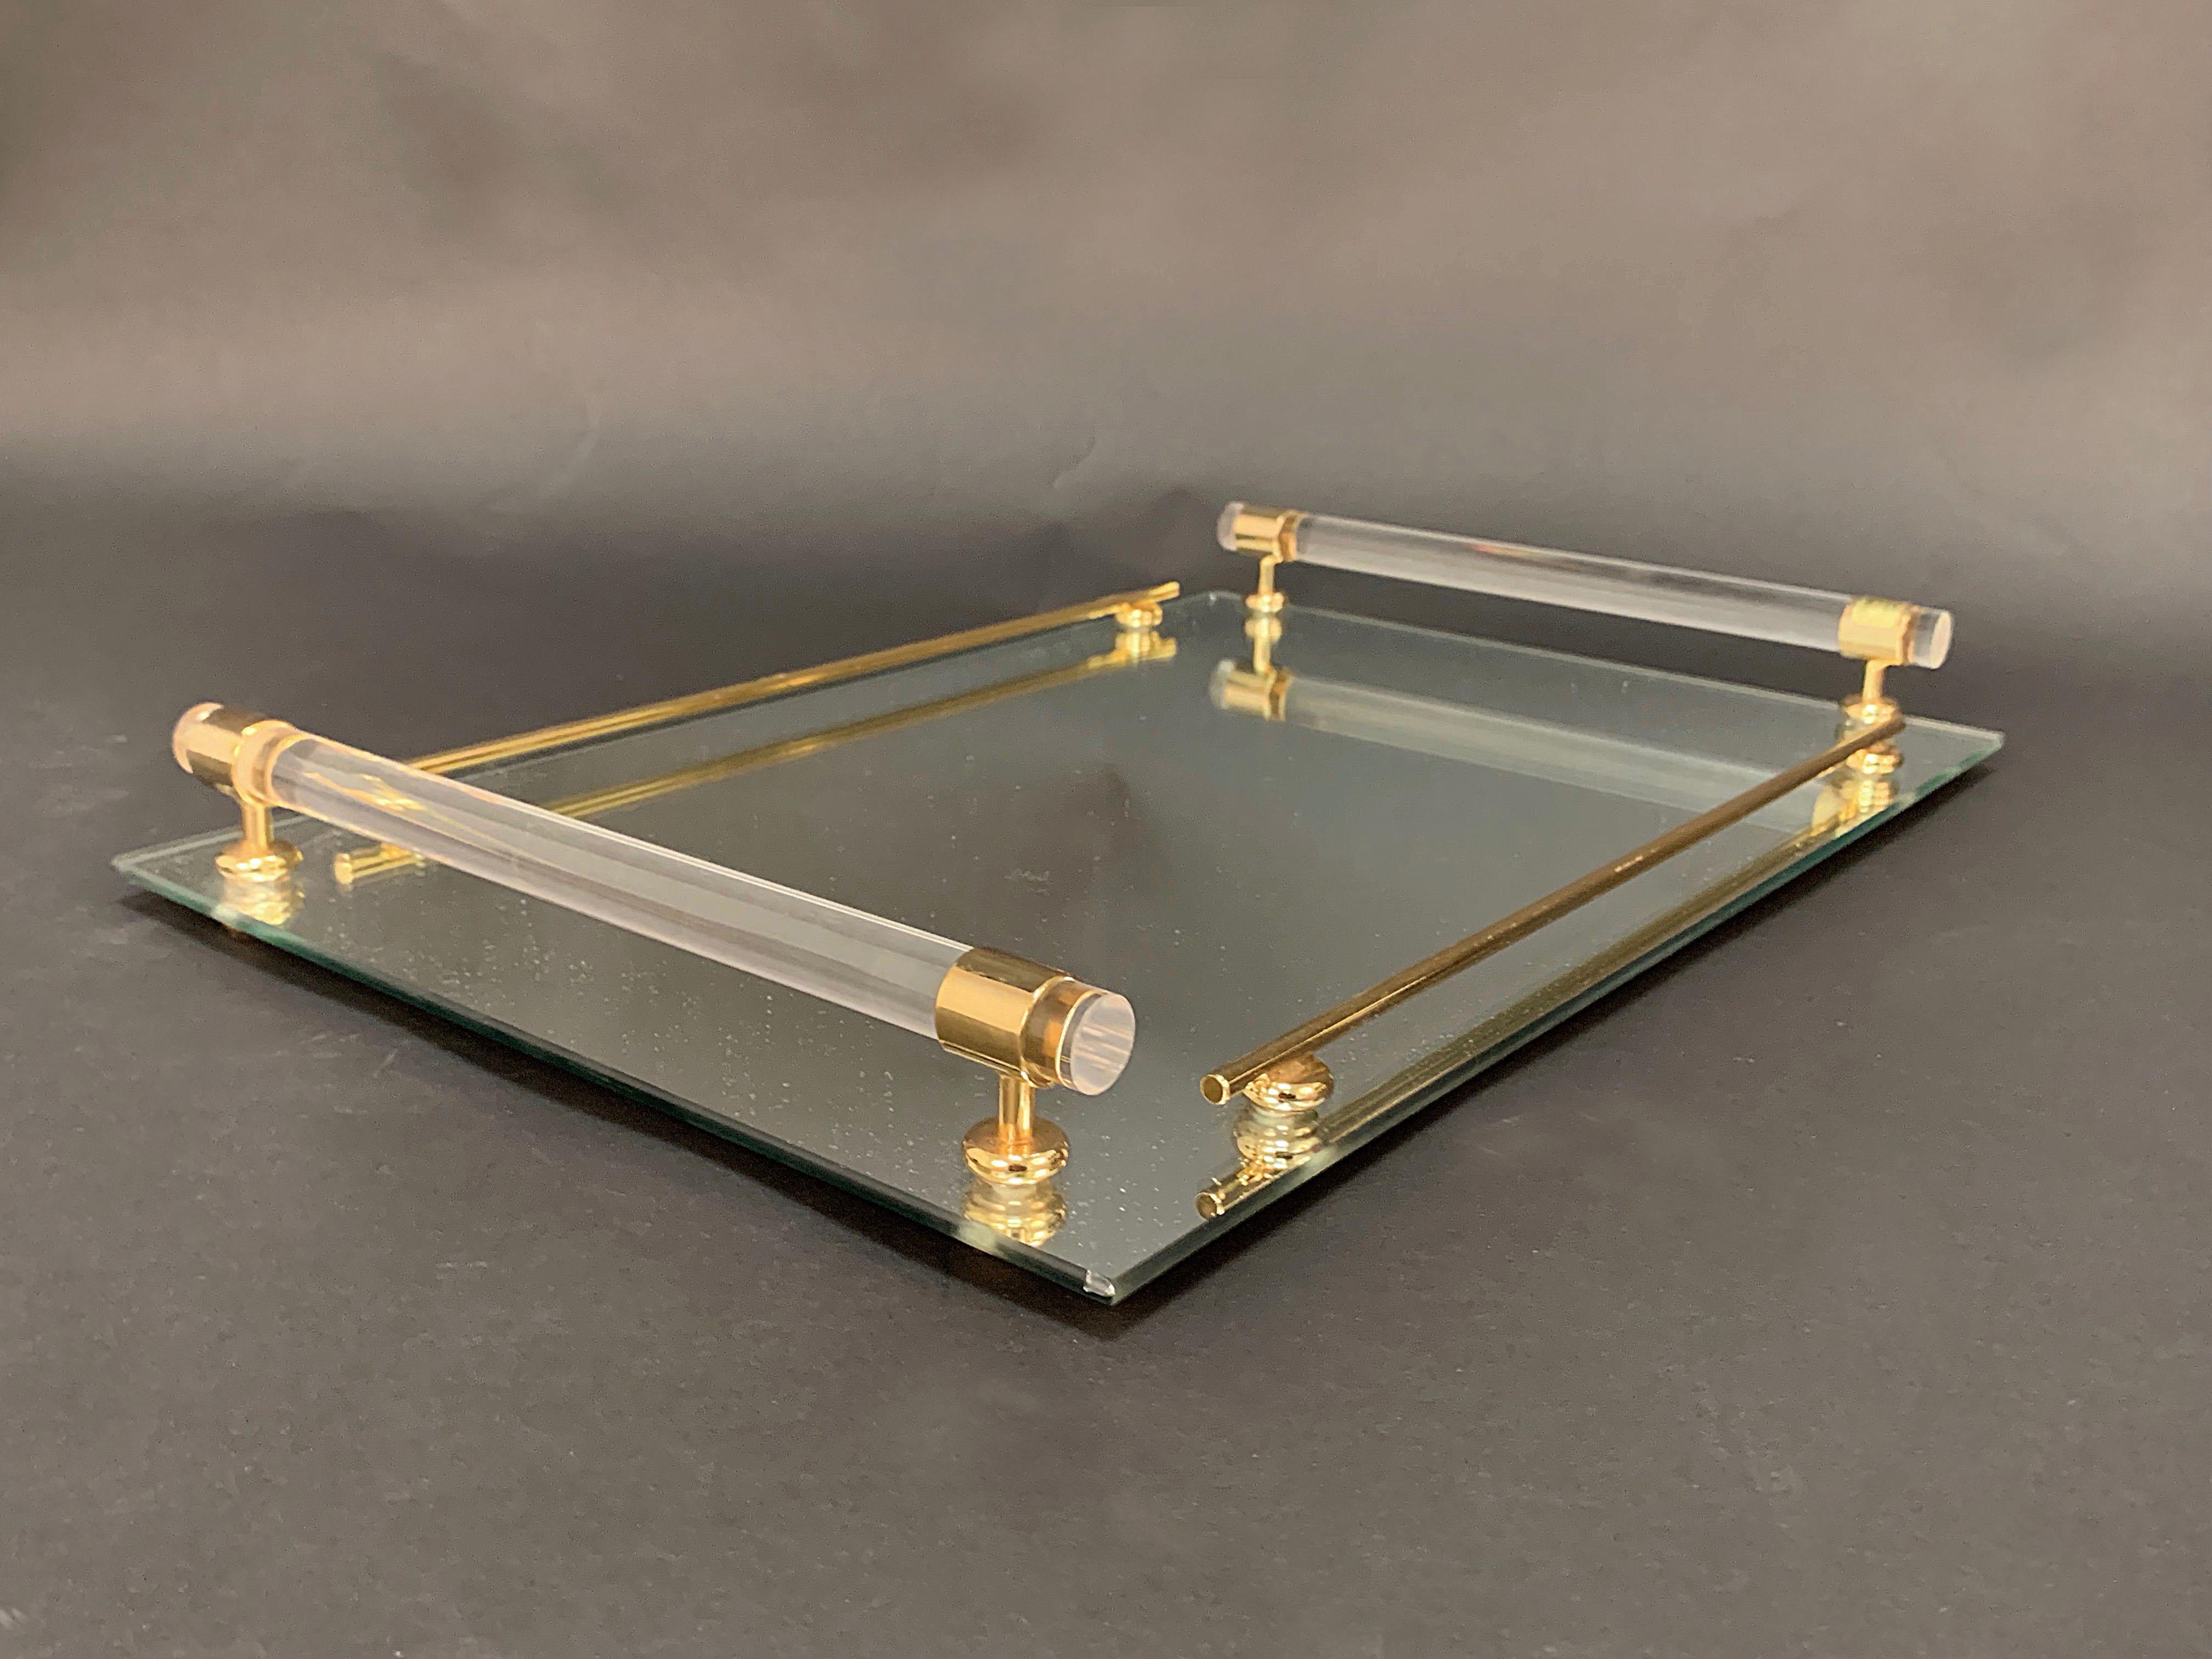 20th Century Tray with Mirror and Lucite, Brass 24-Karat Gold-Plated, Milano, Italy, 1980s